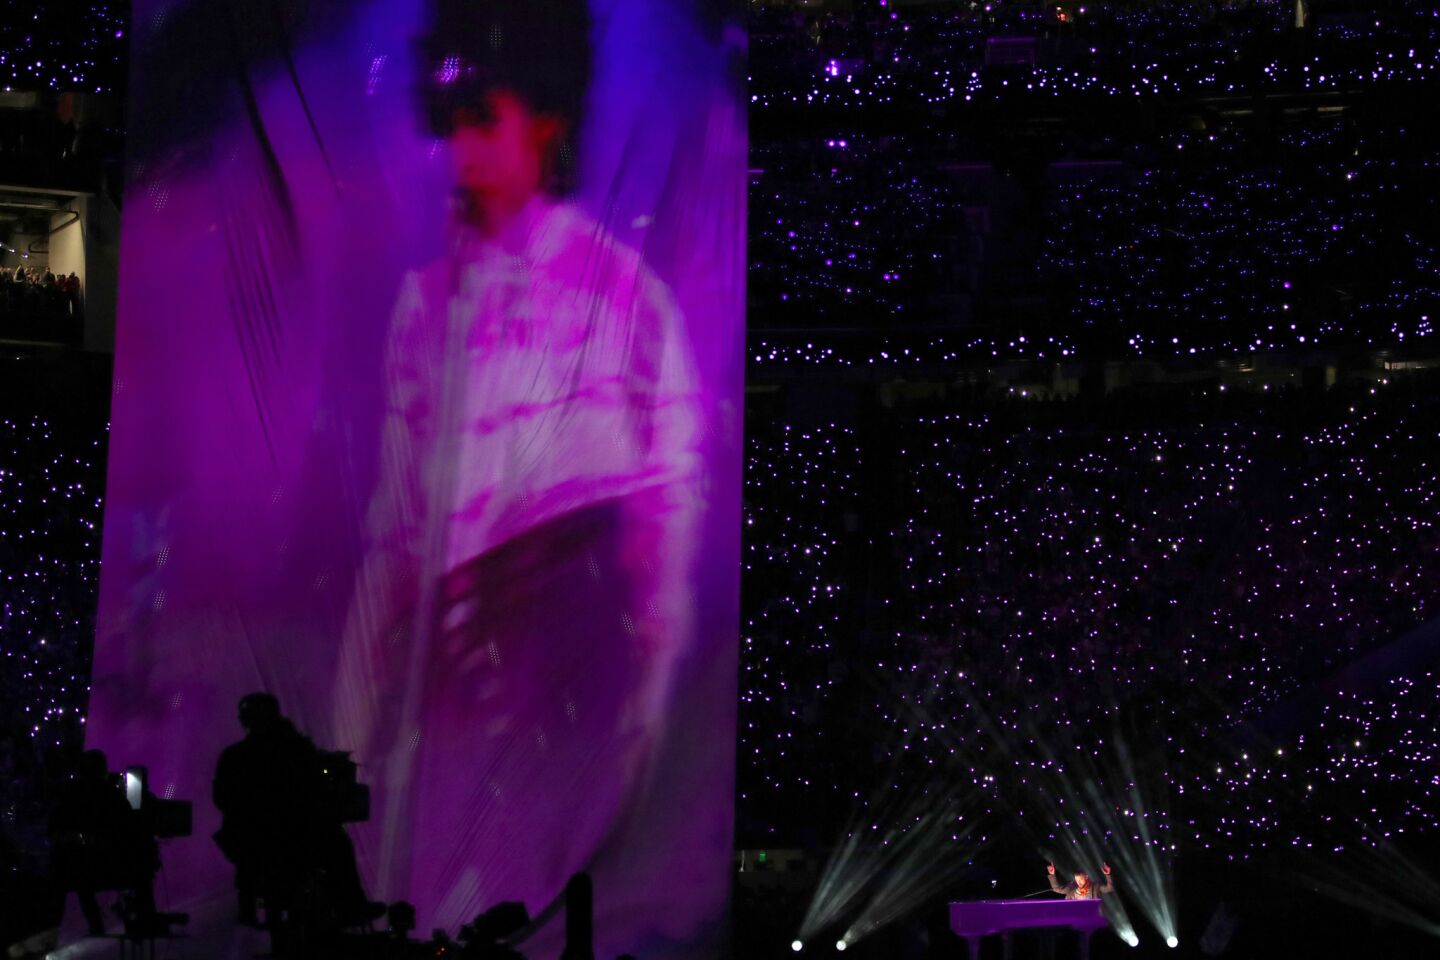 Justin Timberlake performs as an image of the late Prince is projected onto a screen.